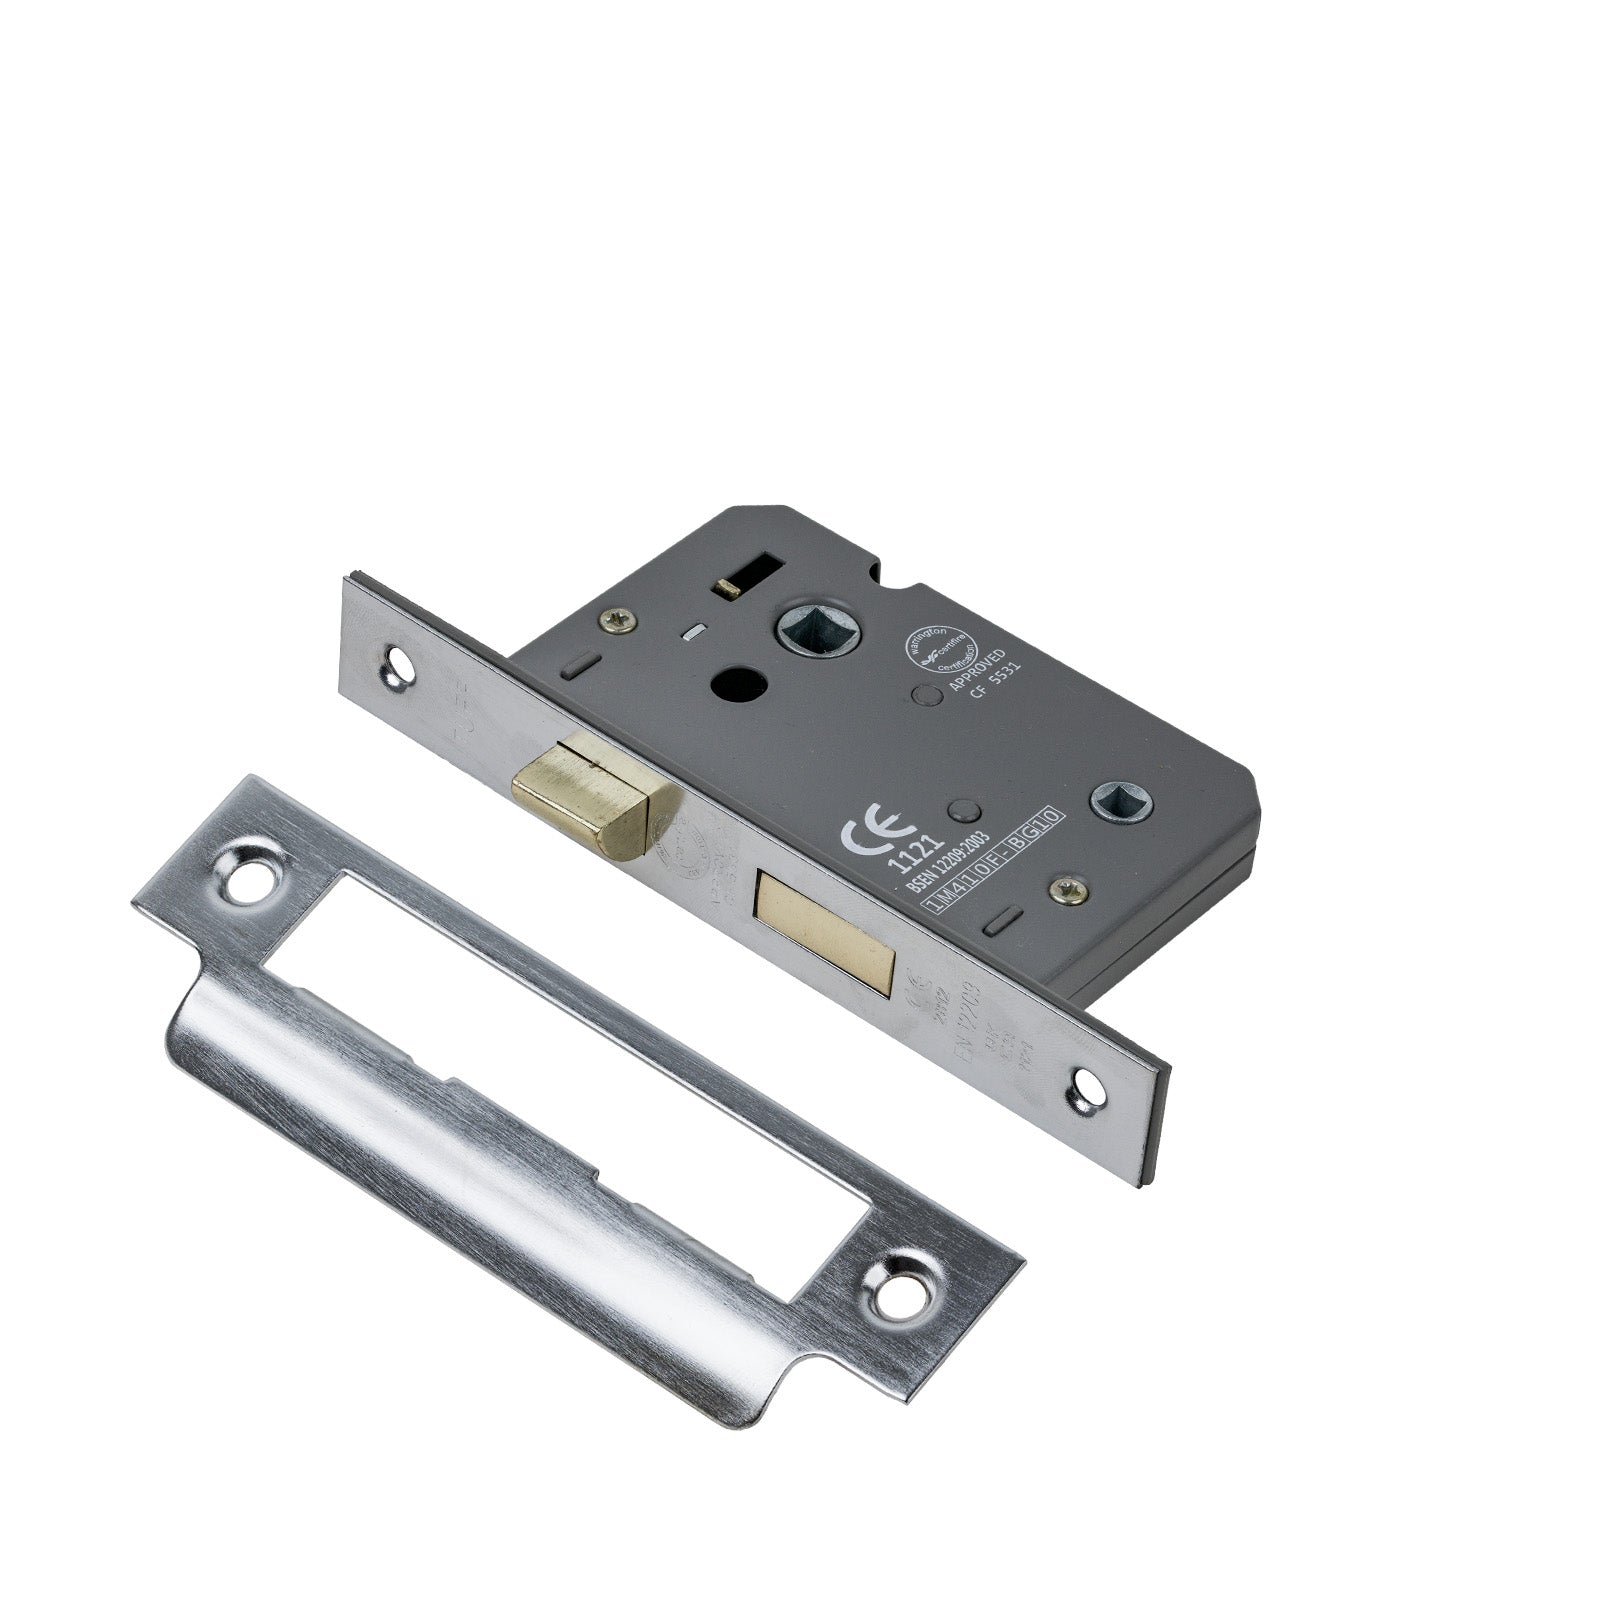 SHOW Bathroom Sash Lock - 2.5 Inch with Satin Chrome finished forend and striker plate